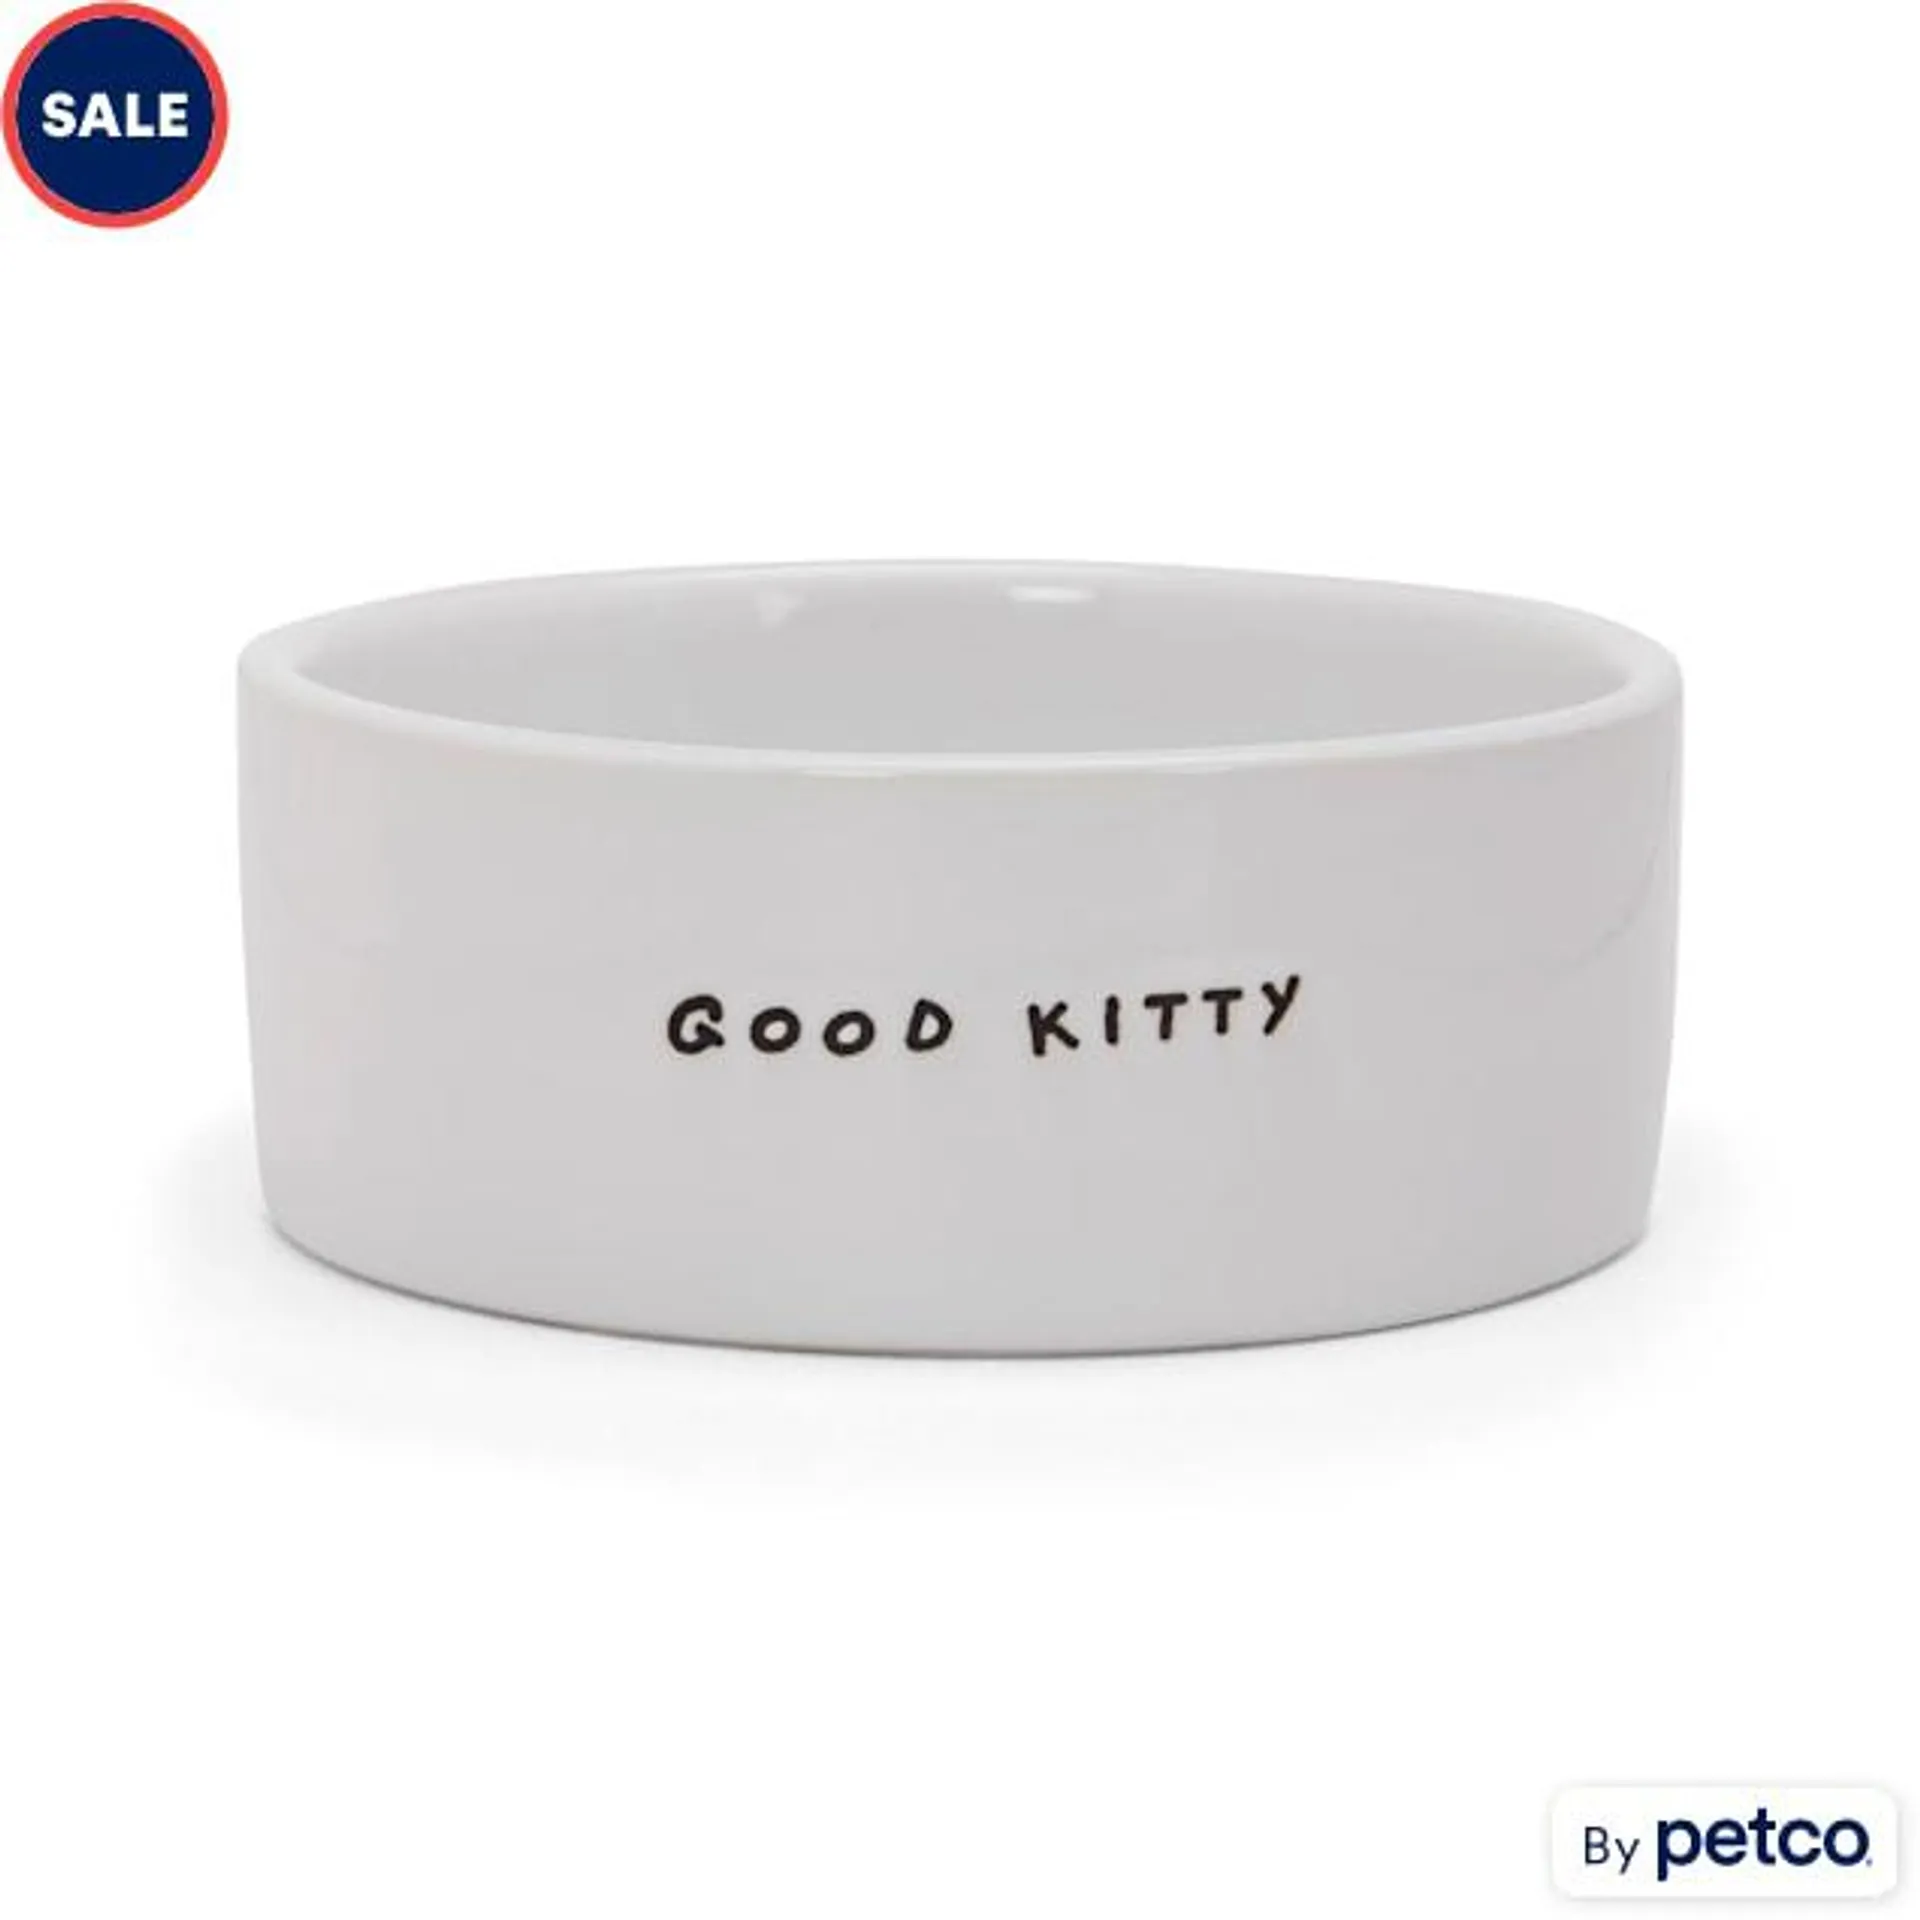 EveryYay Dining In Good Kitty Ceramic Cat Bowl, 1 Cup